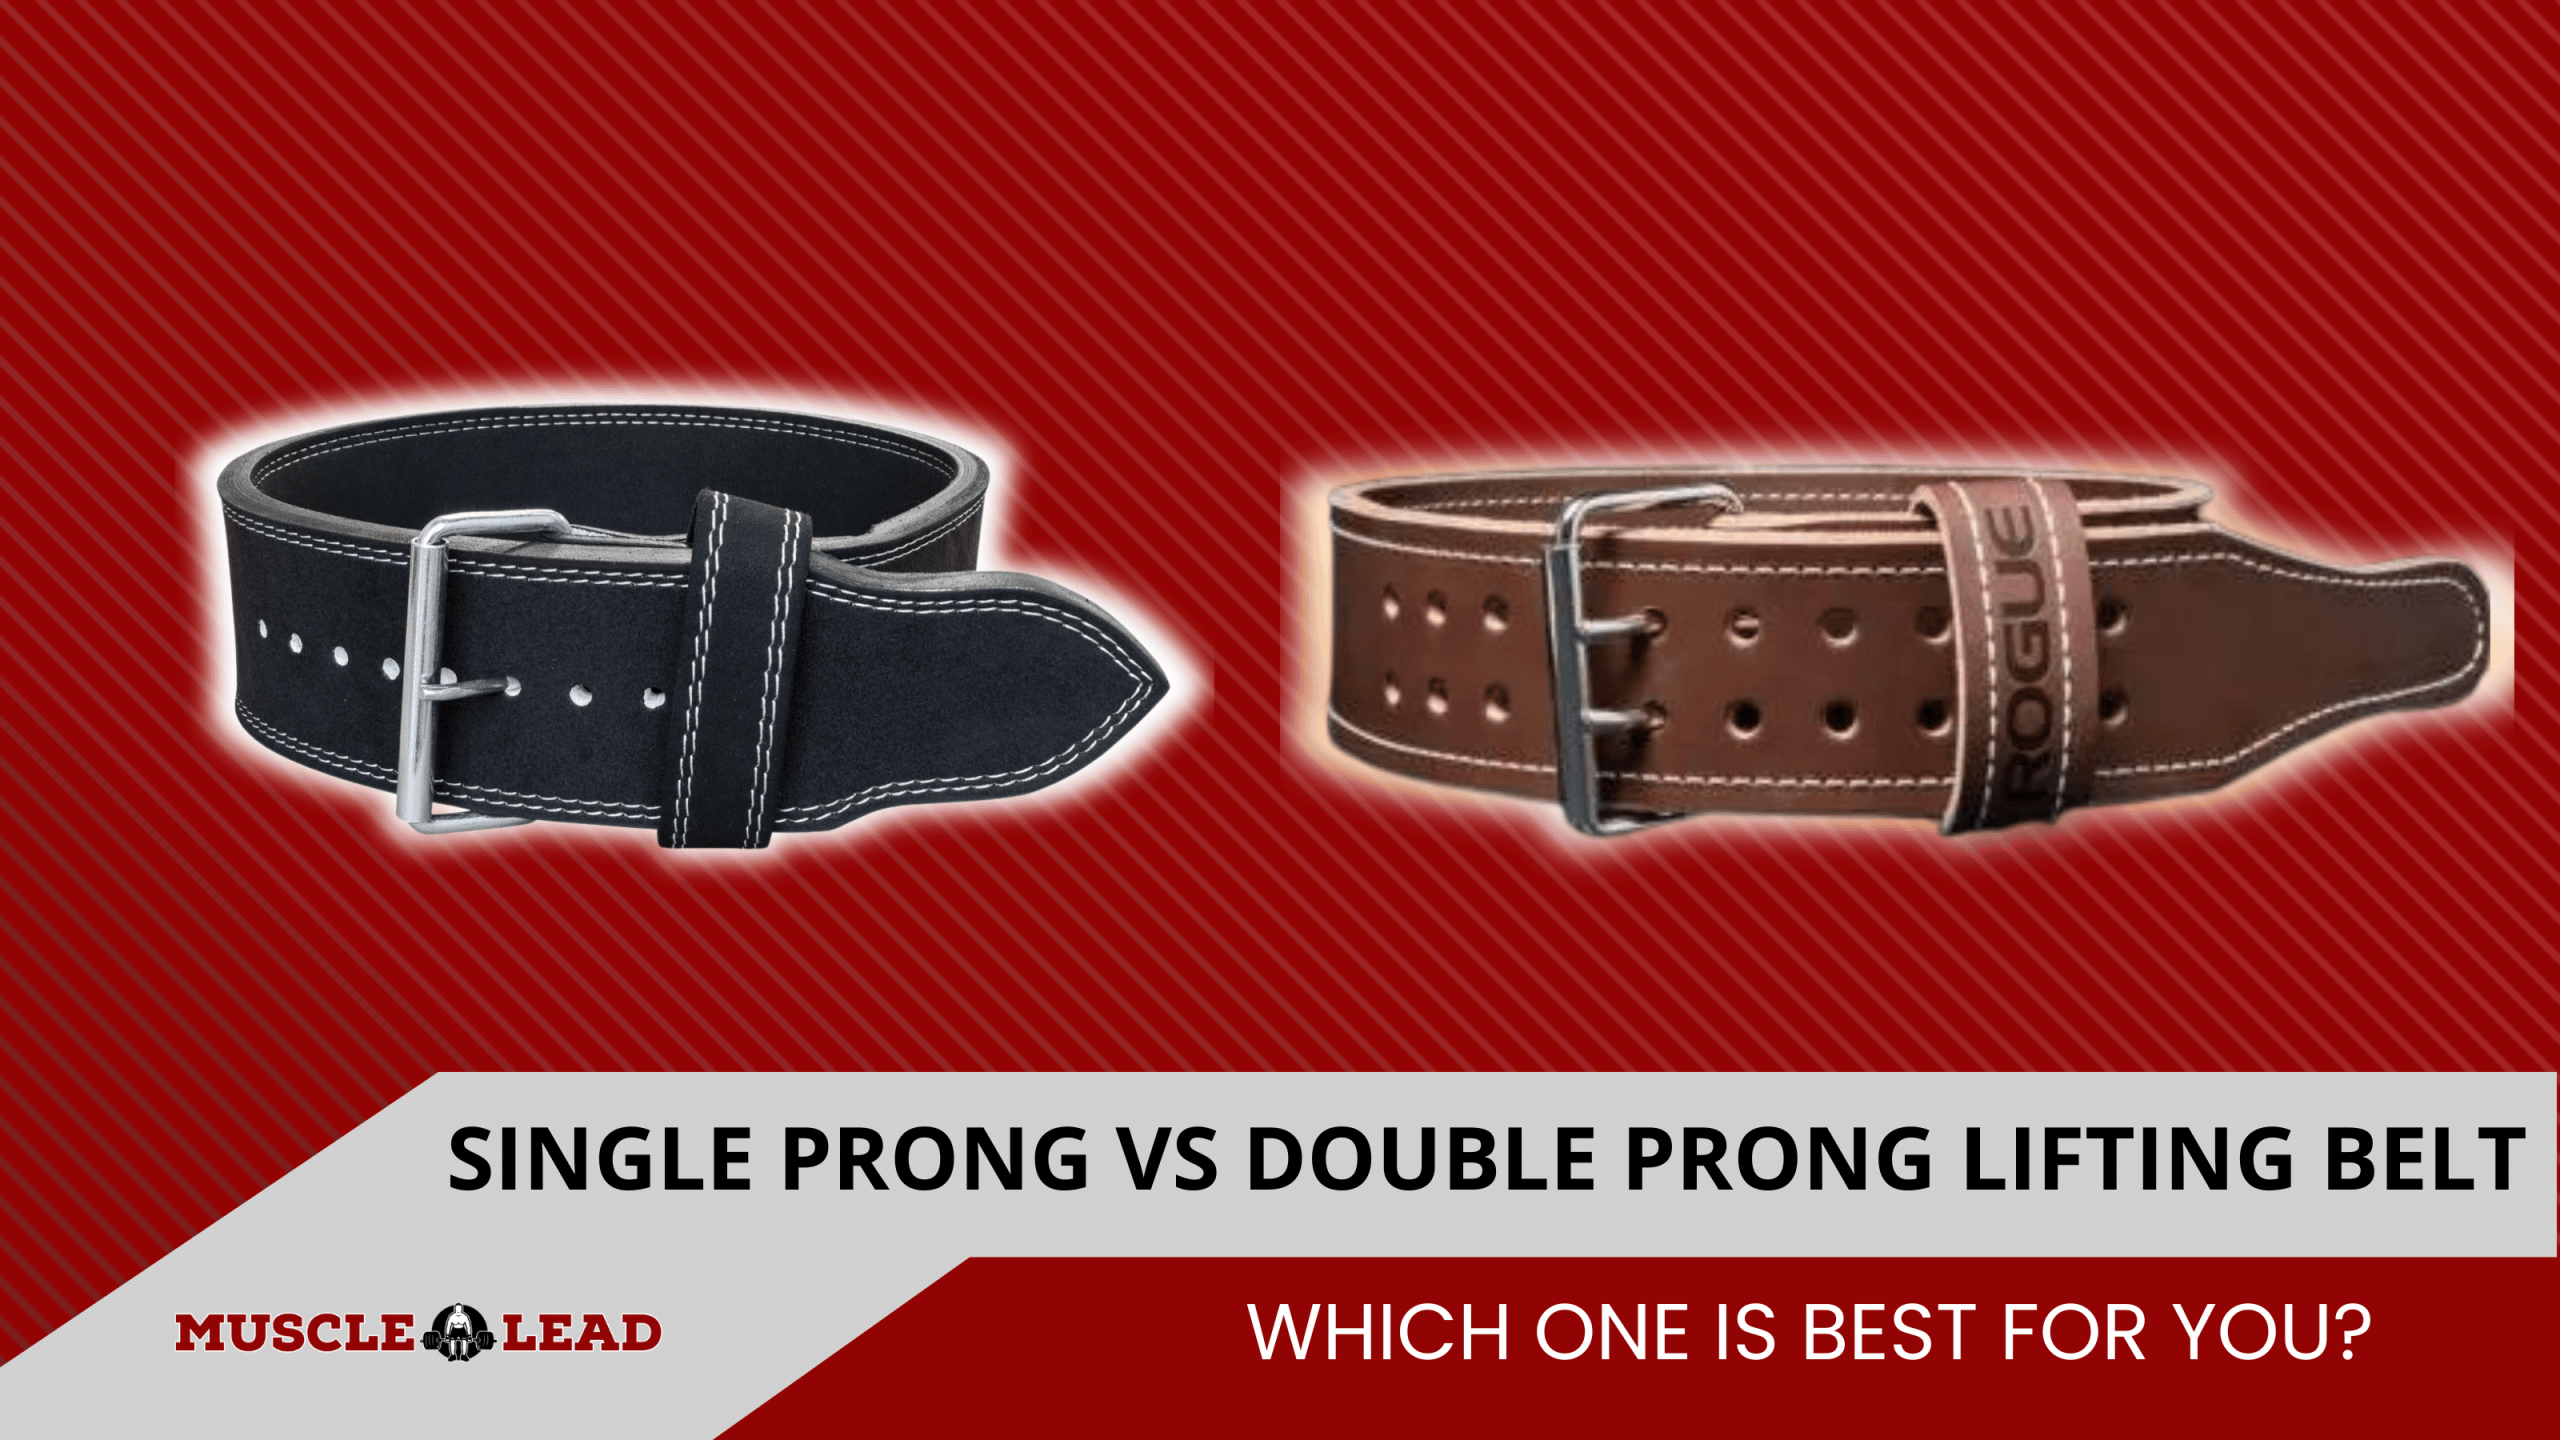 Single Prong Vs Double Prong Lifting Belt – Which One is Best for You